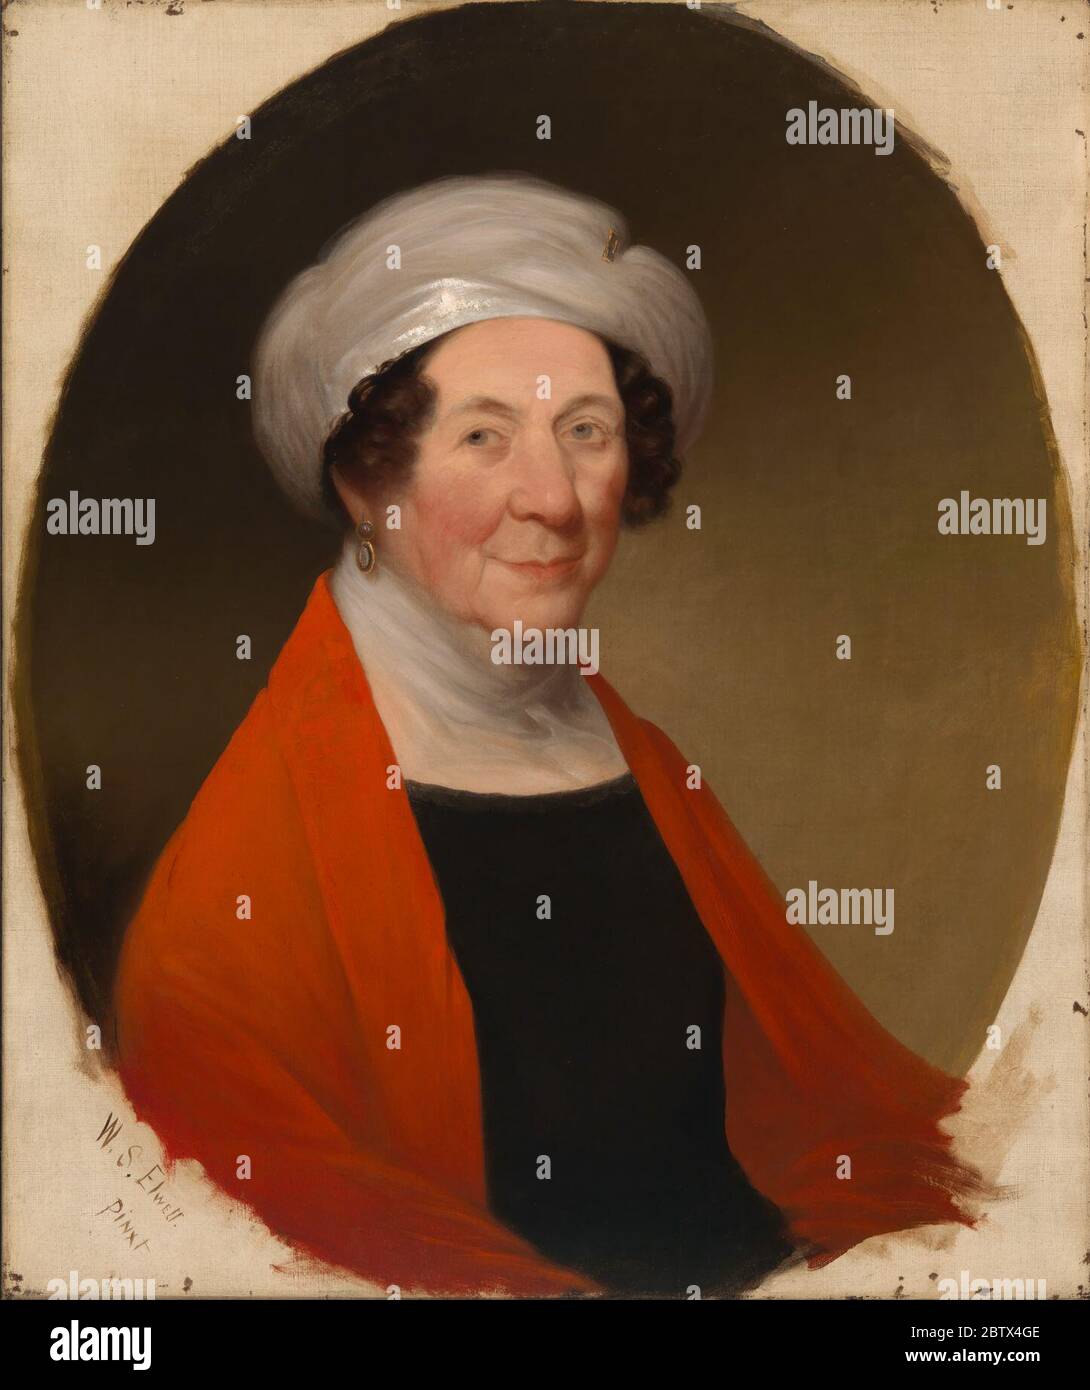 Dolley Madison. Dolley Madison served as White House hostess during the administrations of the widowed Thomas Jefferson and her own husband, James Madison. Her effervescence doubtless accounted, in part at least, for the popularity of Madison's presidency in its last several years. Stock Photo